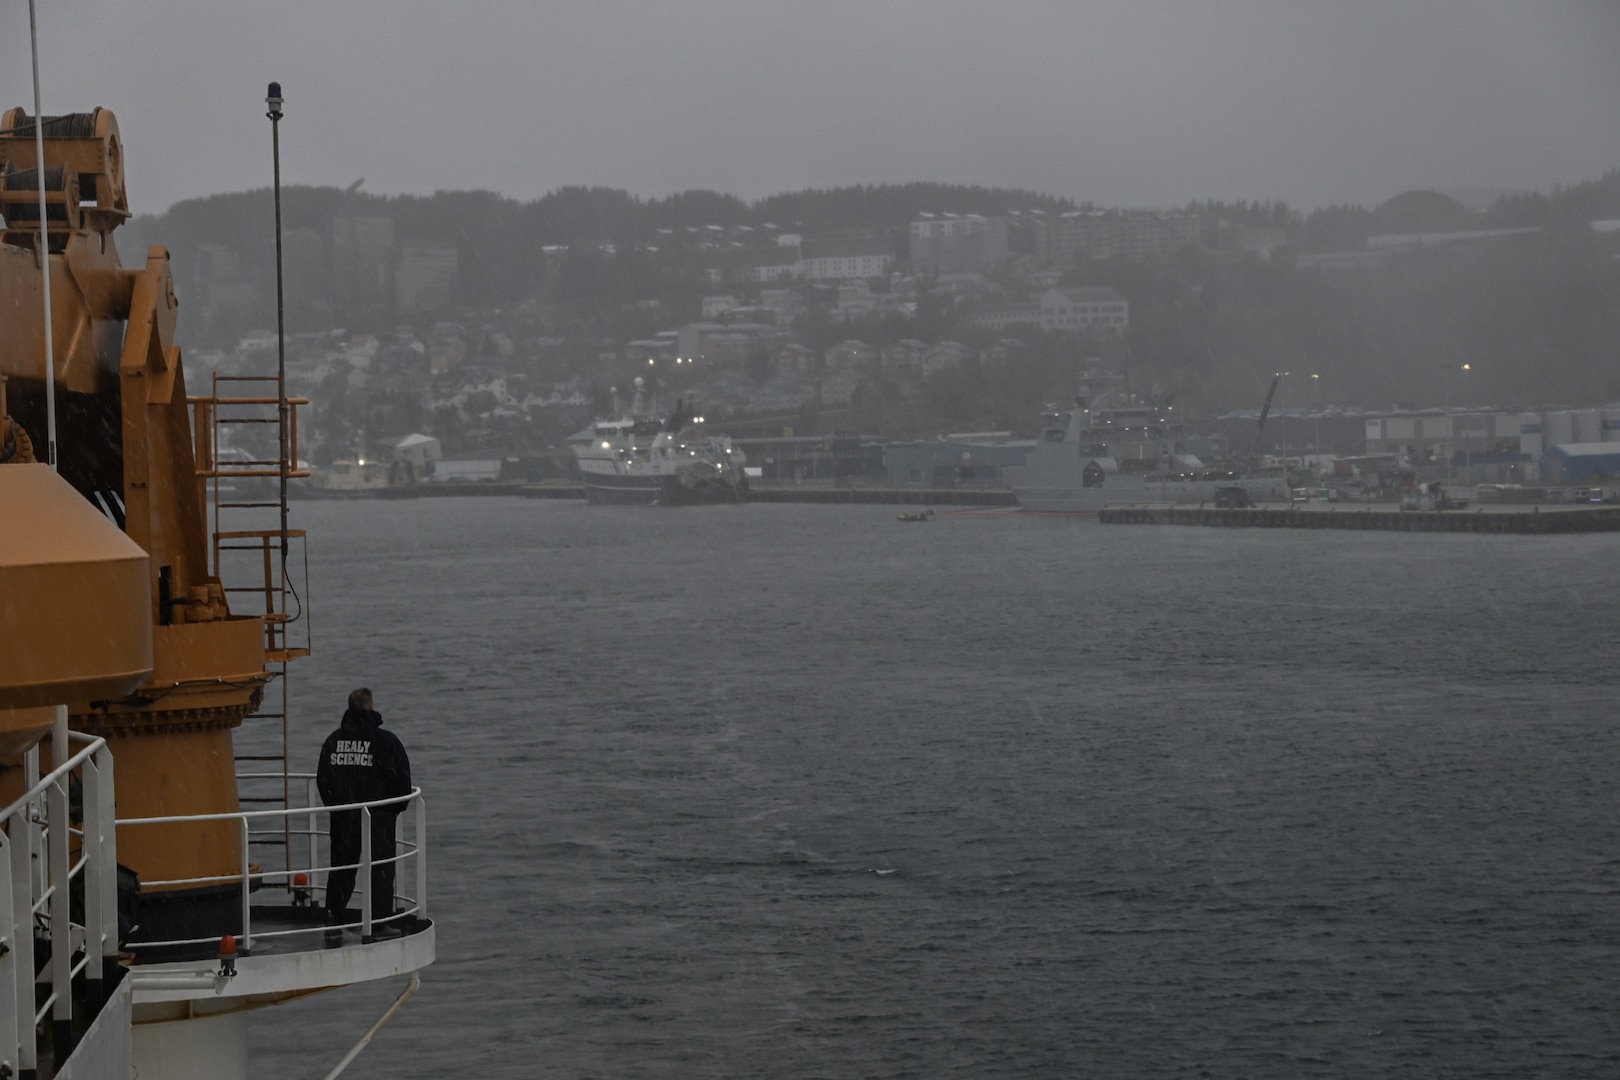 A U.S. Coast Guard Cutter Healy (WAGB 20) crew member looks at Tromsø, Norway as the cutter departs Tromsø, Oct. 5, 2023. During the four-day port call, the Healy and crew conducted joint operations with the Norwegian Coast Guard Vessel Svalbard, hosted a U.S. Coast Guard Research and Development Center (RDC) science roundtable, and welcomed aboard guests from a variety of institutions with interest in the Arctic and Healy’s science mission. (U.S. Coast Guard photo by Senior Chief Petty Officer Charly Tautfest)